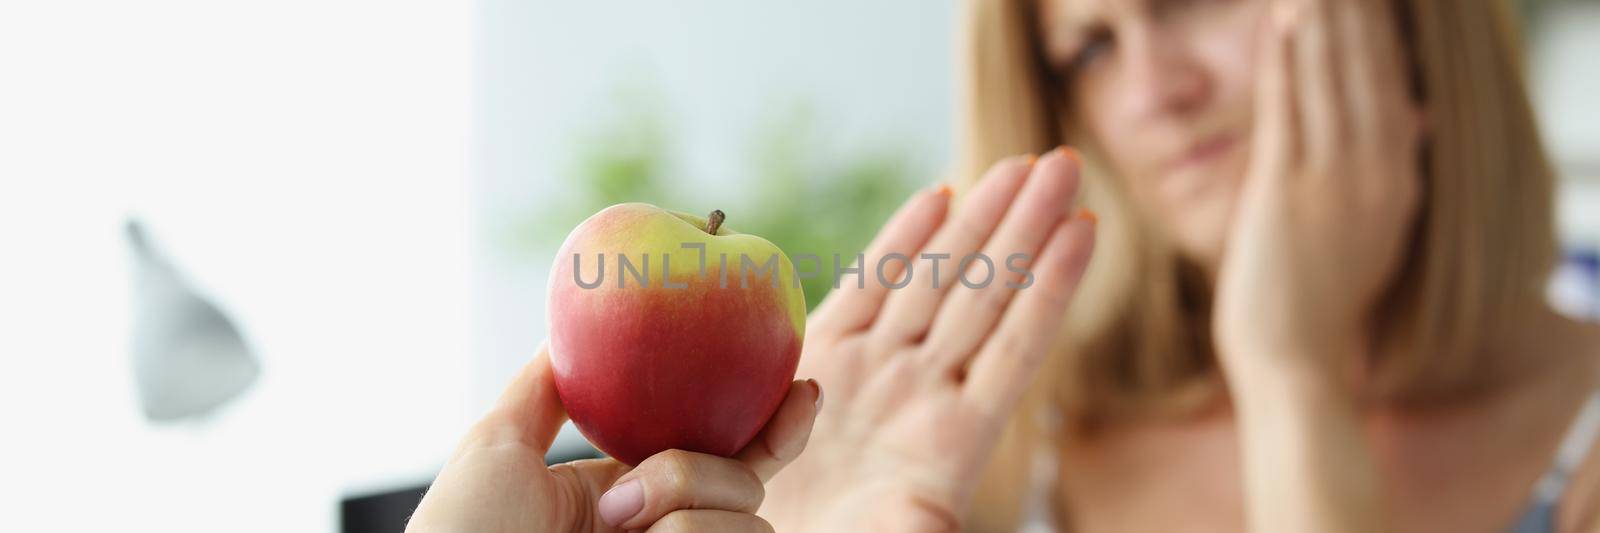 Portrait of person give apple to friend and woman refuse to eat because of tooth pain. Hold hand near face. Dental problem, healthcare, toothache concept